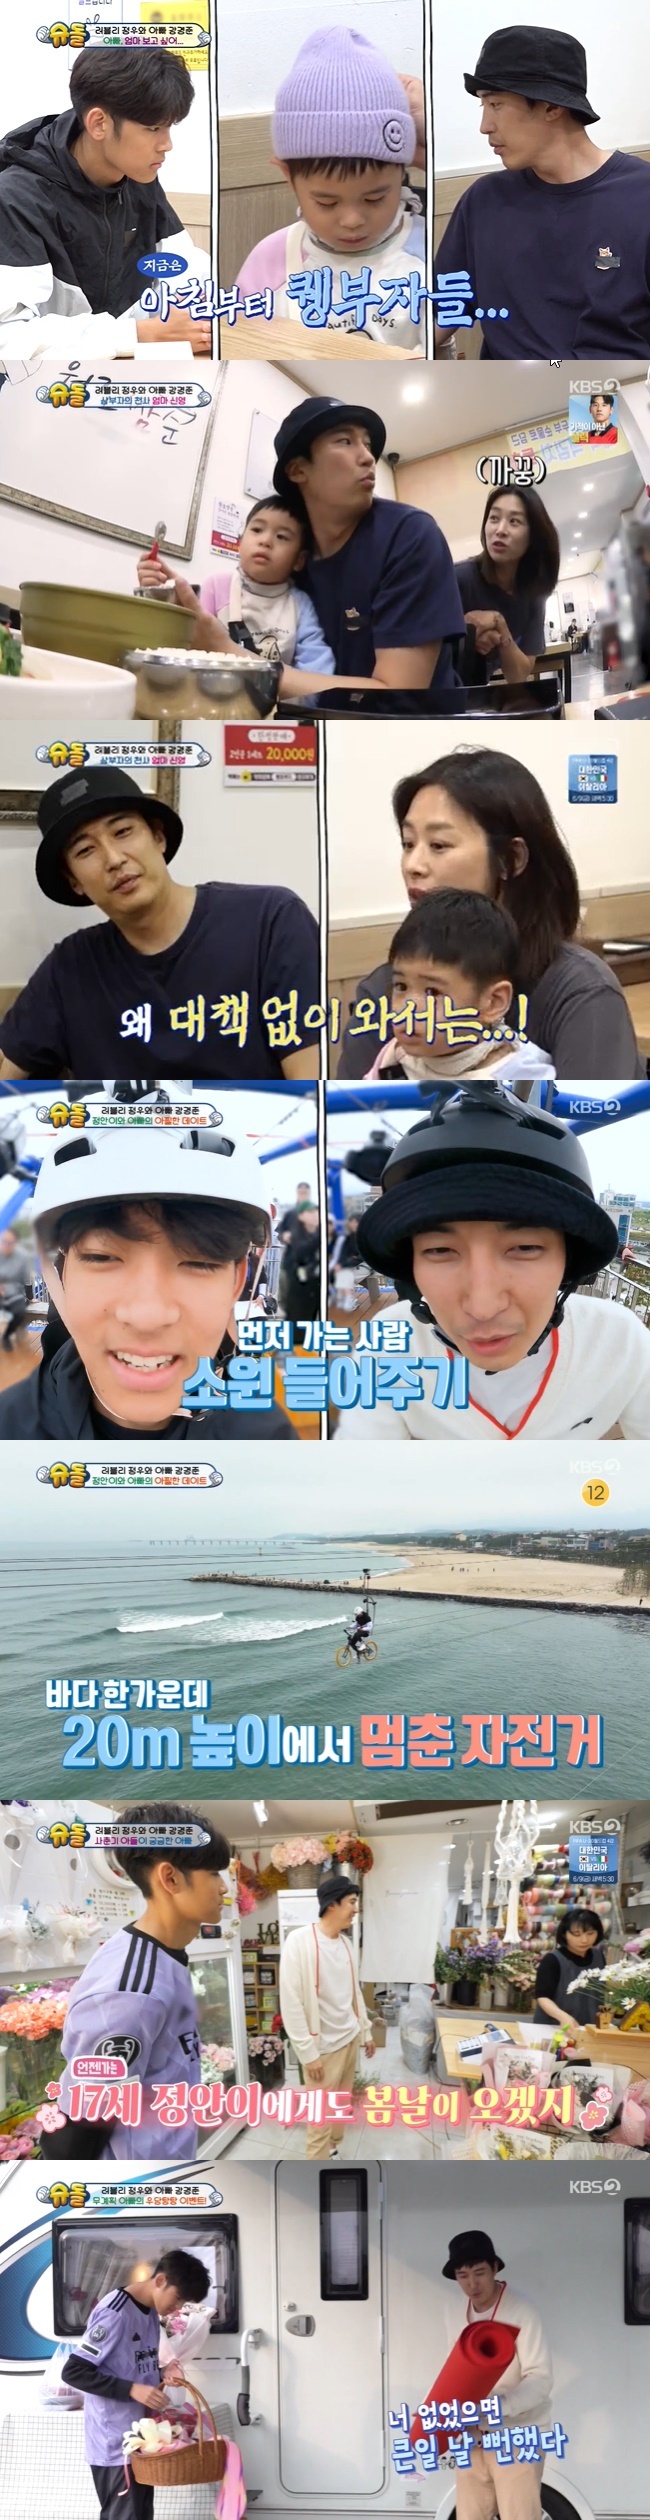 Kang Kyung-joon made a Wedding Anniversary Event to his wife Jang Shin-young with the help of a 17-year-old son.On June 6, KBS 2TV  ⁇  The Return of Superman  ⁇  was released to the Kang Kyung-joon familys Gyeonggang Line trip.Kang Kyung-joon, who traveled extensively with the two sons on a unplanned Gyeonggang Line trip, was unexpectedly chilly due to chilly weather and uncomfortable sleeping.On the second day of the trip, Kang Kyung-joon No Strings Attached Jang Shin-young, a rich man eating at a tofu shop, was surprised to see three peoples clothes.Second, Jung Woo gave a glimpse as soon as she saw her mother, and jeong-an also said that if she had come, she would not have done this.Kang Kyung-joon seems to have become a high-profile sinner, but at first I thought it would be worth a try even if I did not really have a wife.But when I showed up, I was so thankful and relieved.Jang Shin-young encouraged Jasin to spend time alone with No Strings Attached Kang Kyung-joon and jeong-an, who take care of the second.The two went to experience the sea sky bicycle, which is 20m above the water surface and 600m round trip between the towers.The two began a confrontation with a wish-granting bet, but there was an unexpected situation in which the bicycle of jeong-an stopped in the air.Kang Kyung-joon, who looked at the son with anxious eyes, joked that it was okay because it was not me when the son was rescued safely.Kang Kyung-joon, who finished the bicycle experience with jeong-an and the sea sky, remembered that it was Wedding anniversary a week after shooting day.Kang Kyung-joon went to the market with jeong-an and bought his wifes favorite chicken soup, sashimi, cake, flowers, etc., and prepared an event in a caravan where the sea spread.Kang Kyung-joon thanked jeong-an for saying that it would have been a big day without you.Kang Kyung-joon, who has become a human wreath, is always by my side.I love you. I told him that Jasin was a gift, conveying a sweet message.Jang Shin-young gave jeong-an a deep kiss in front of the son while showing the reality of the couple.Kang Kyung-joon, who presented the princess collection to Jang Shin-young, handed the bouquet and said that he had a hard time raising us.Kang Kyung-joon thinks about son jeong-an I think that jeong-an thinks that I can not come to me.I felt a lot bigger when I was together yesterday. I was still thinking that jeong-an was six years old. My Jasin, who I thought was still young, was a bit regretful.Jung Woo also takes care of me, I am good to my mother and it is so beautiful. I thought I should spend a little more time with jeong-an.jeong-an is also a little short, but I am grateful to Kang Kyung-joon for showing me his willingness to take care of me.